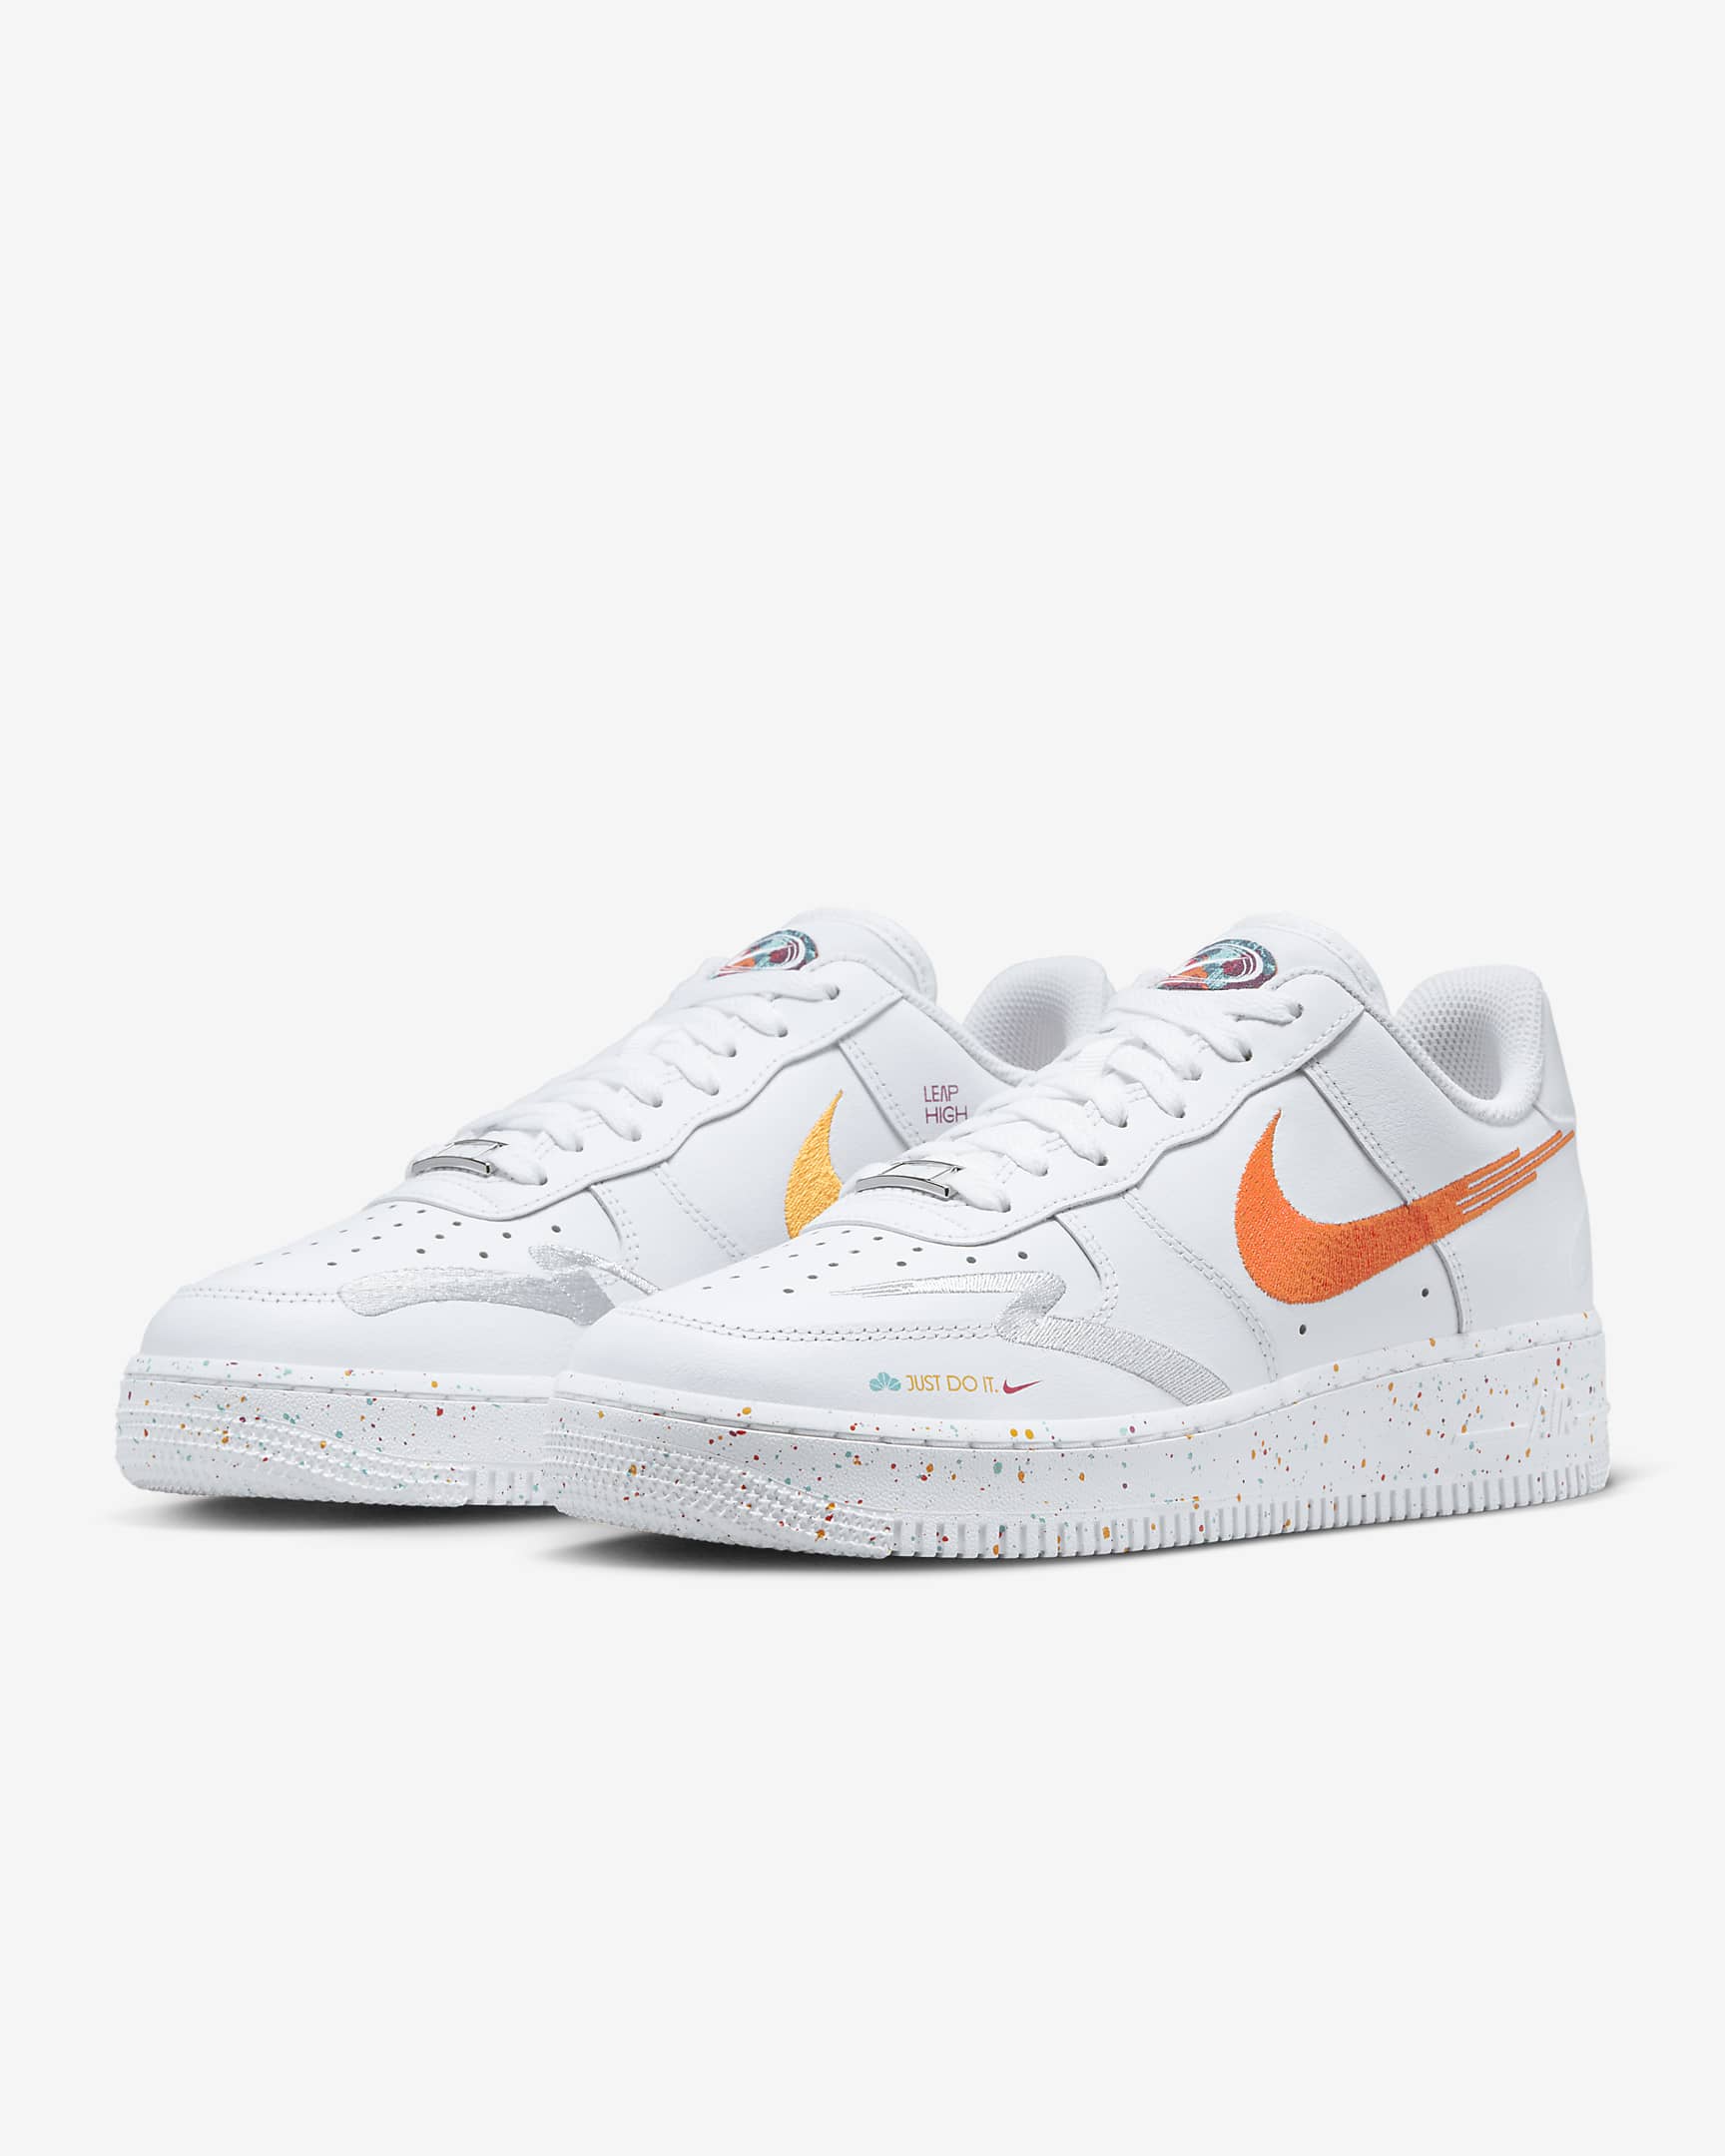 Nike Air Force 1 '07 LX Women's Shoes - White/White/Safety Orange/Washed Teal